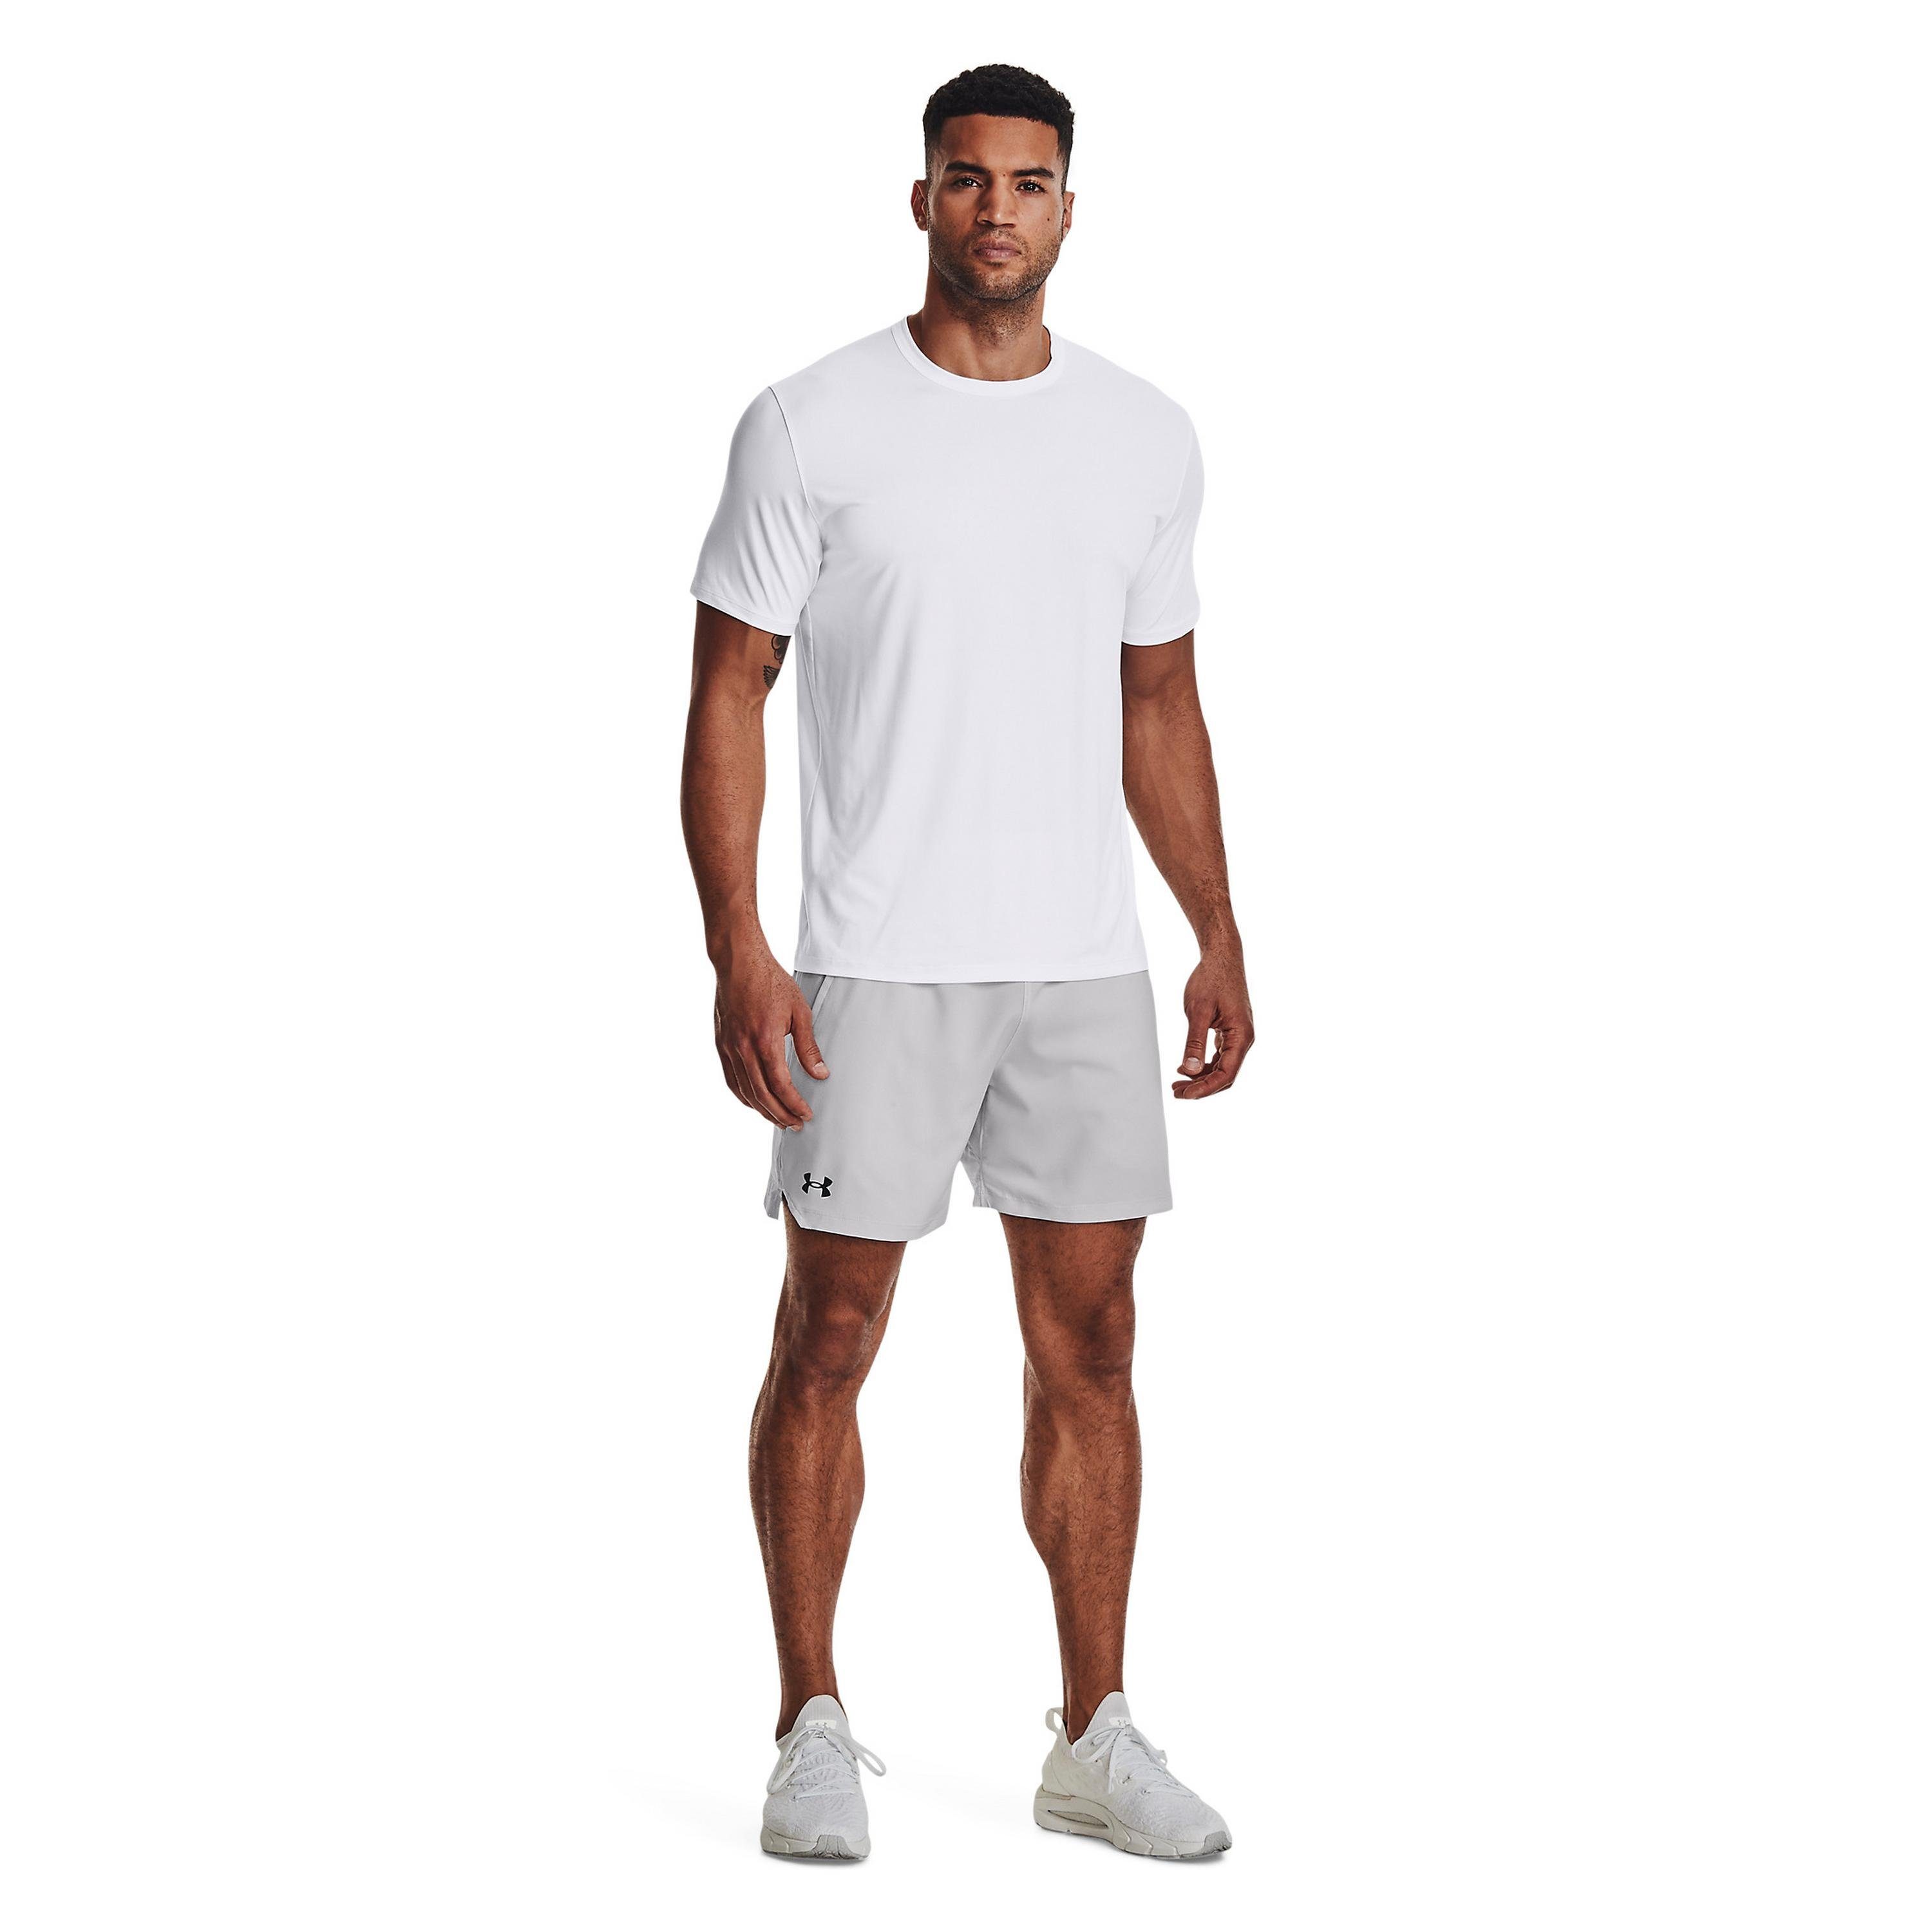 Vanish Armour® Halo Under Gray 014 Woven Funktionsshorts